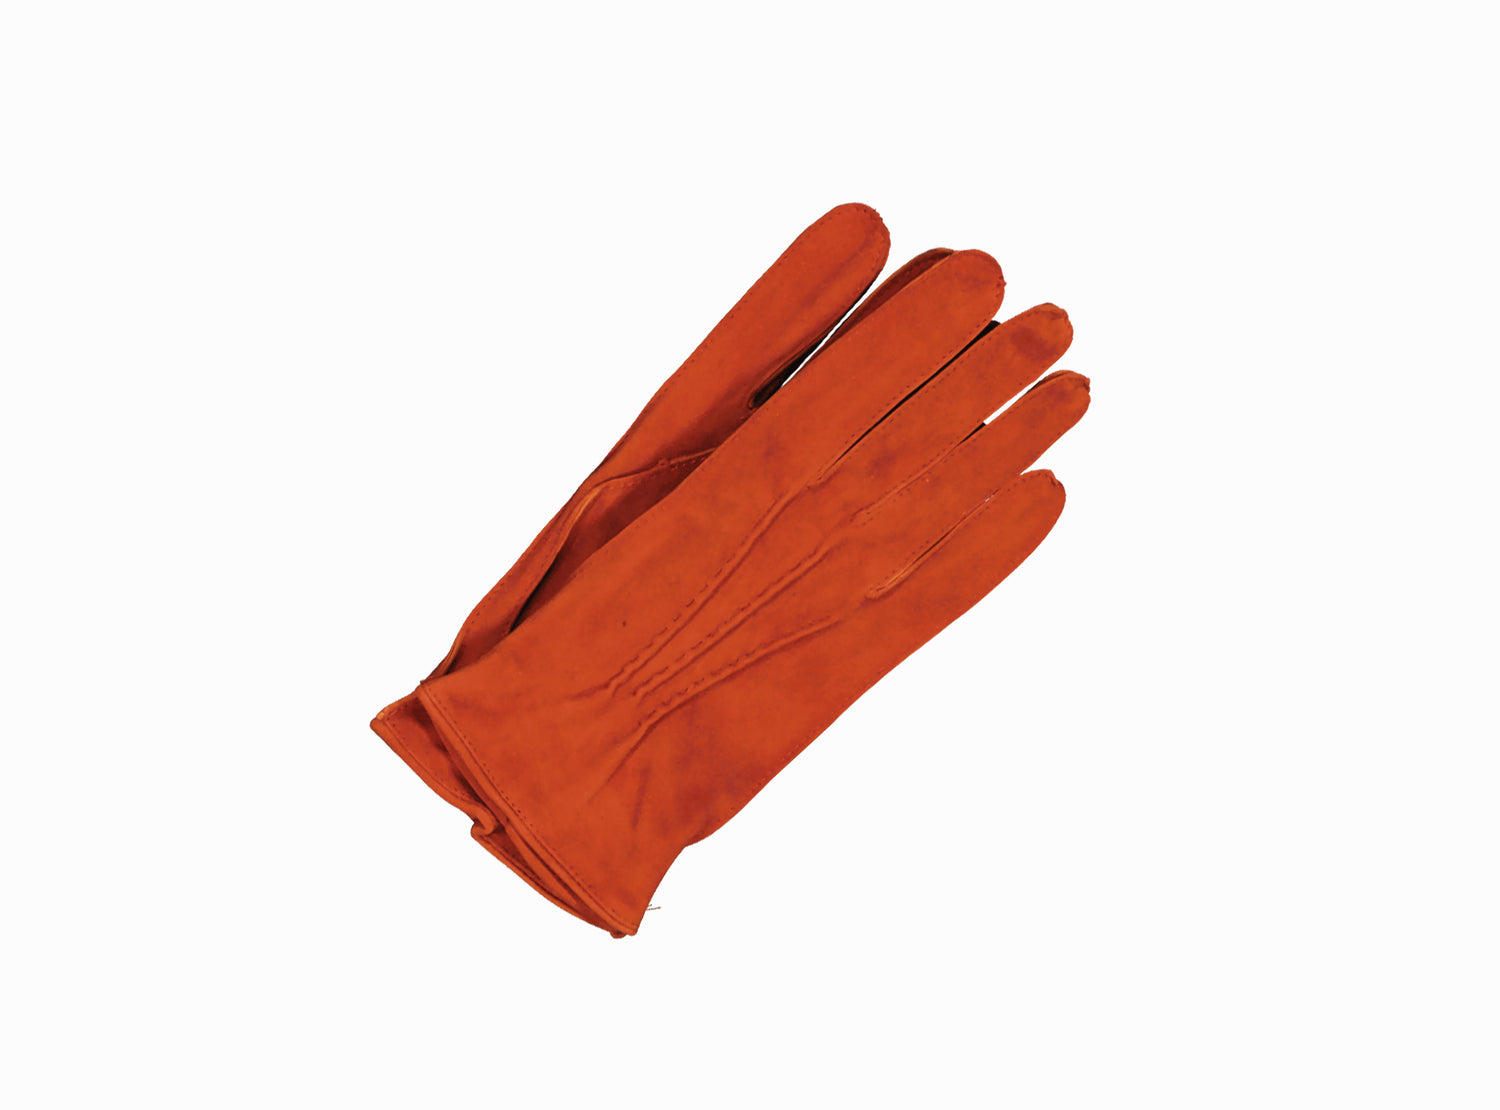 Sauso for Turo Reindeer Suede Gloves in Picante Orange (7856774742238)